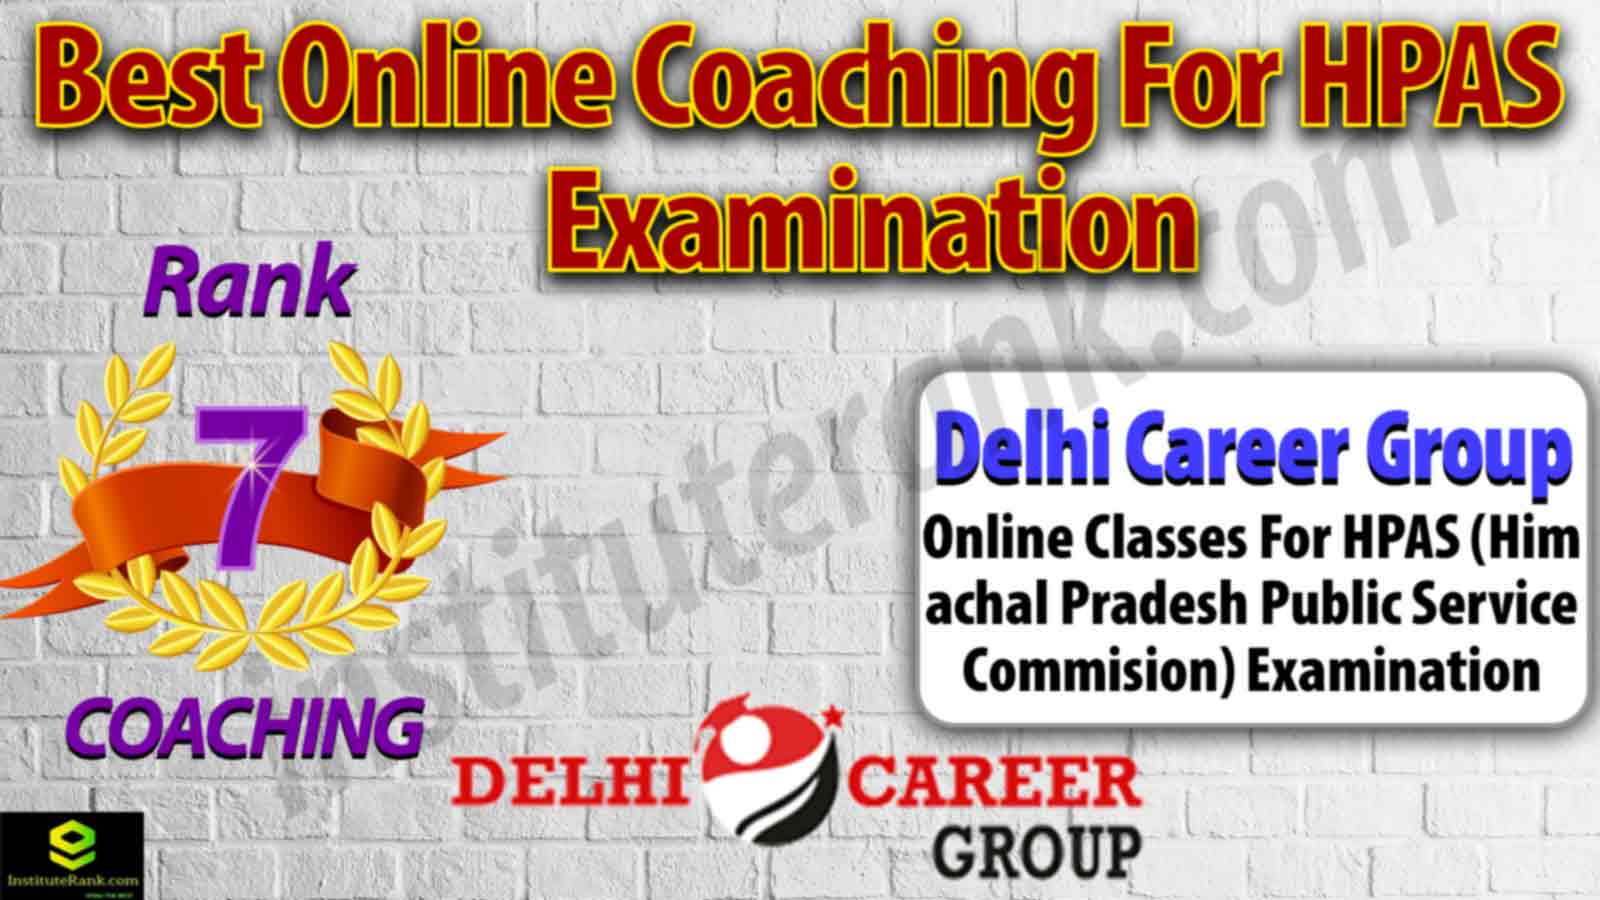 Online Coaching Centre for HPAS Examination